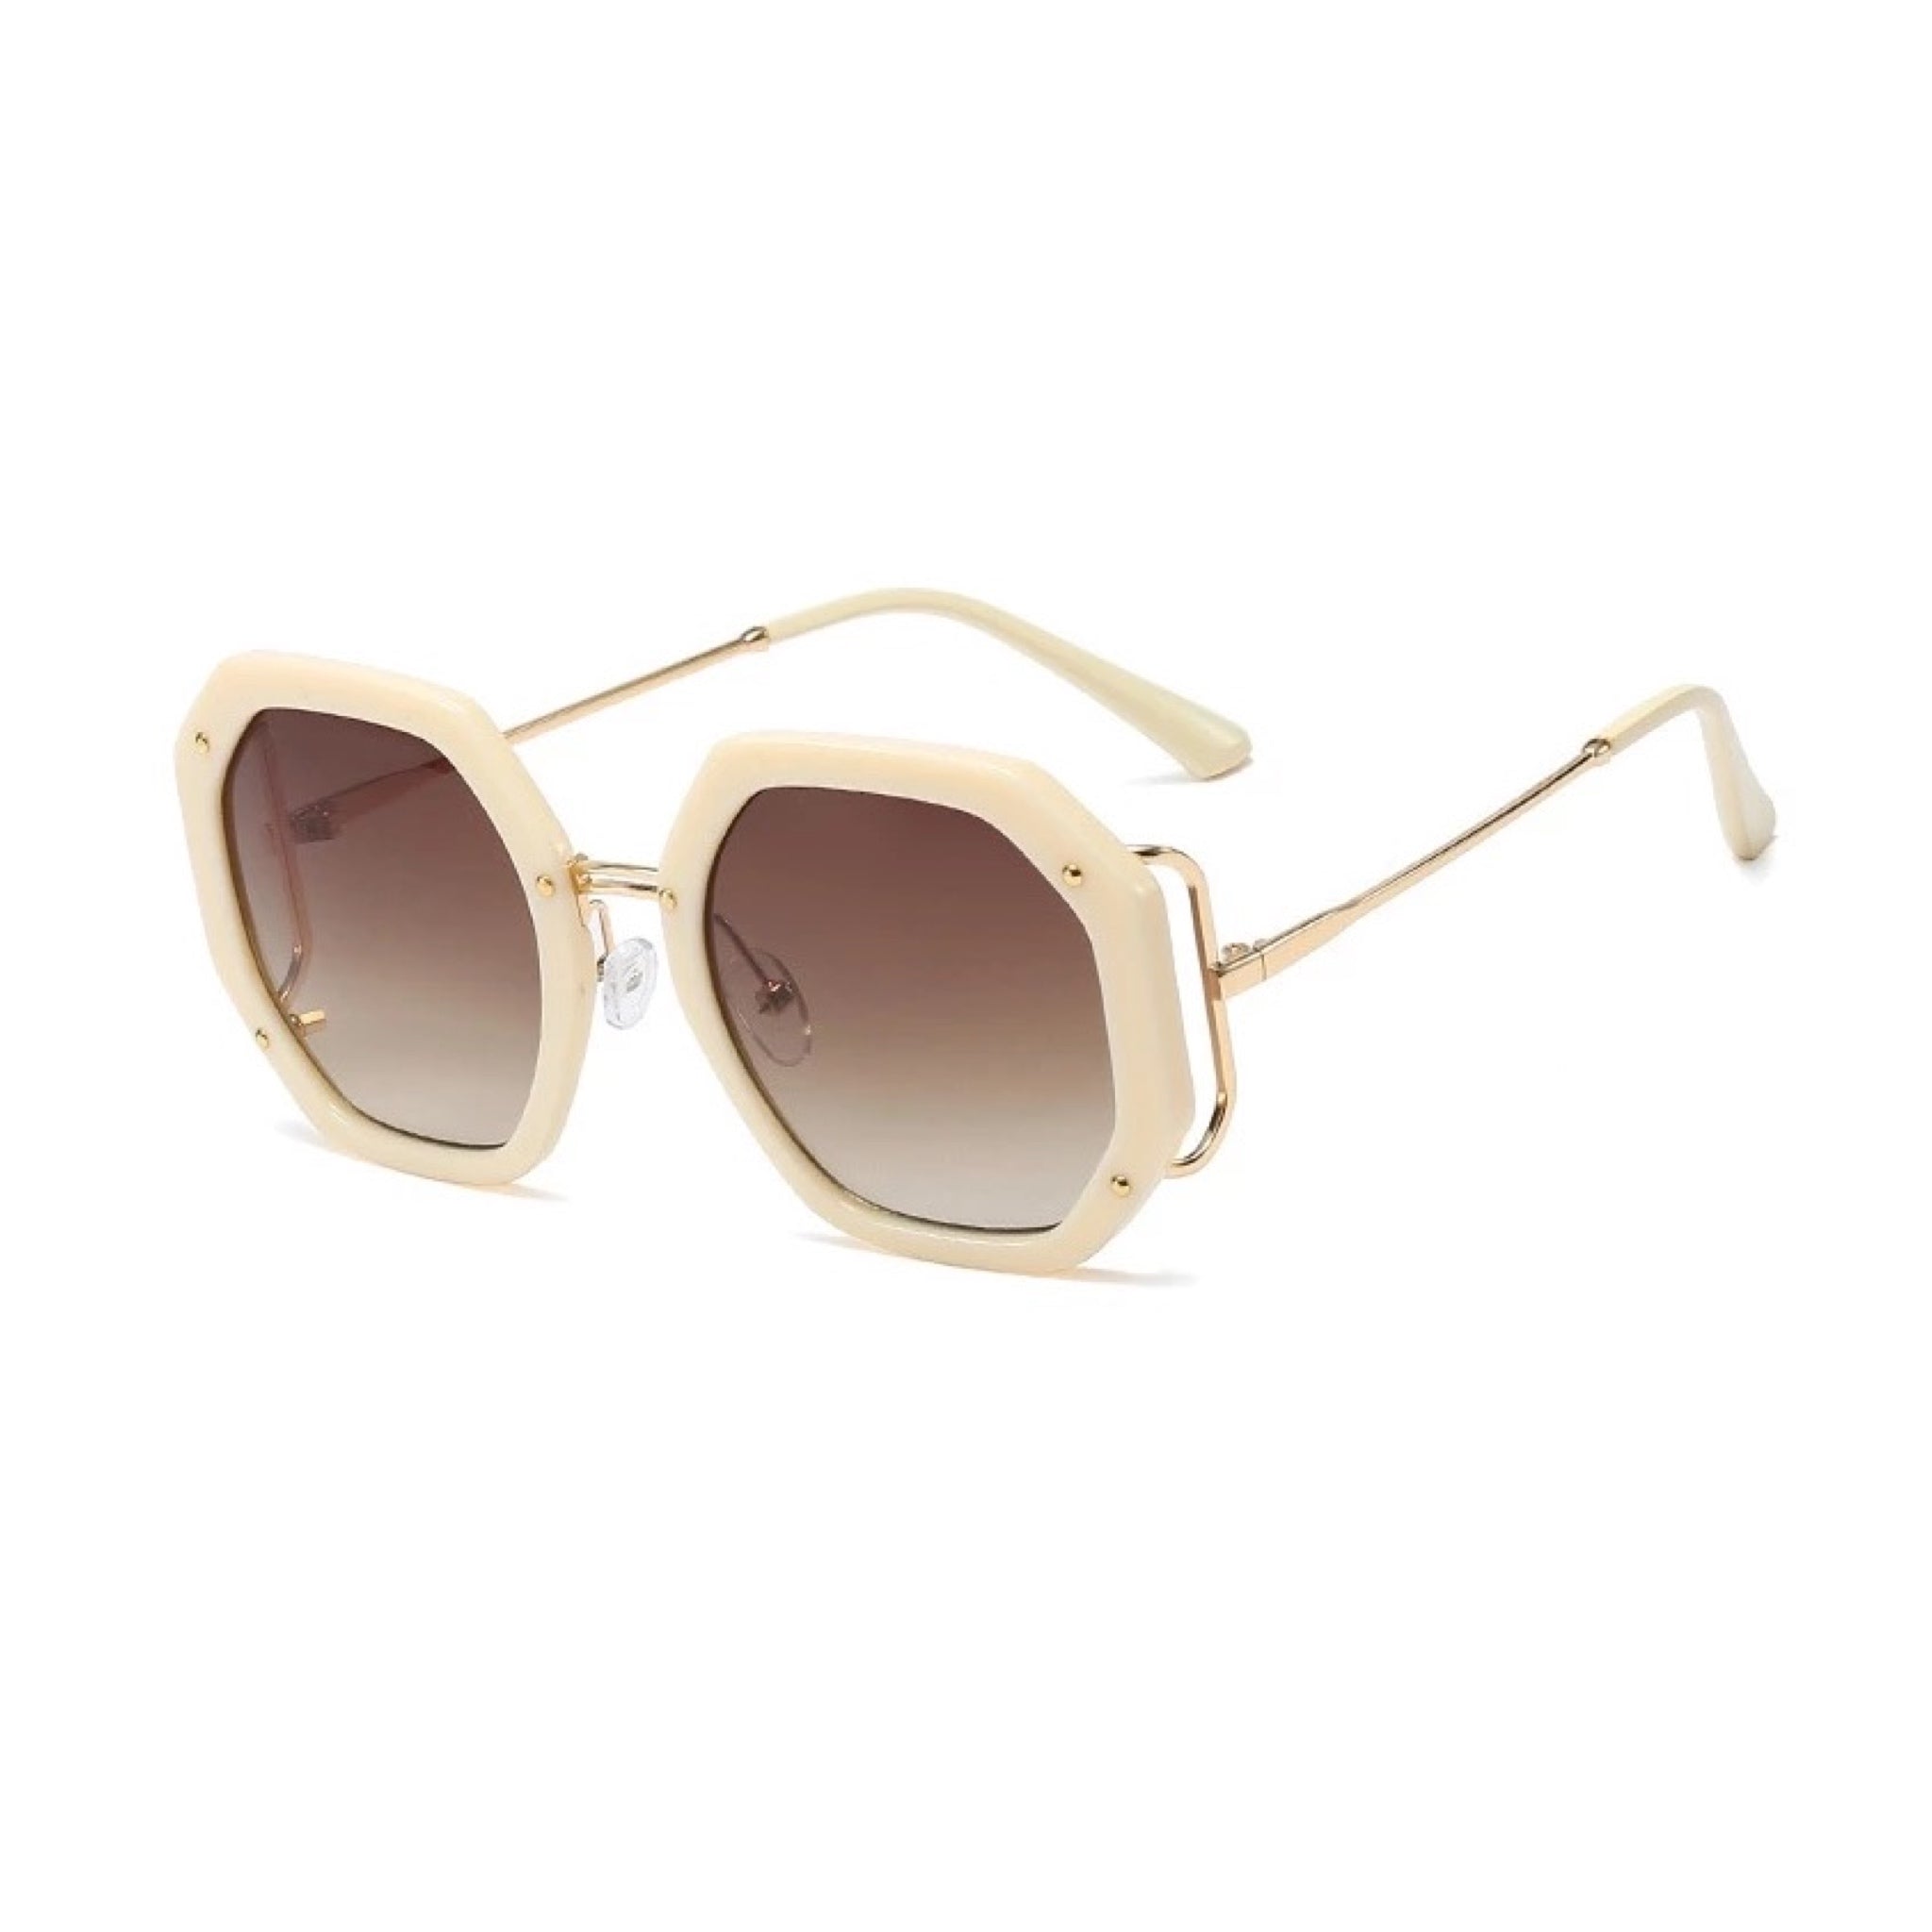 GOLDxTEAL retro cream oversized sunglasses with gold tone metal accents.